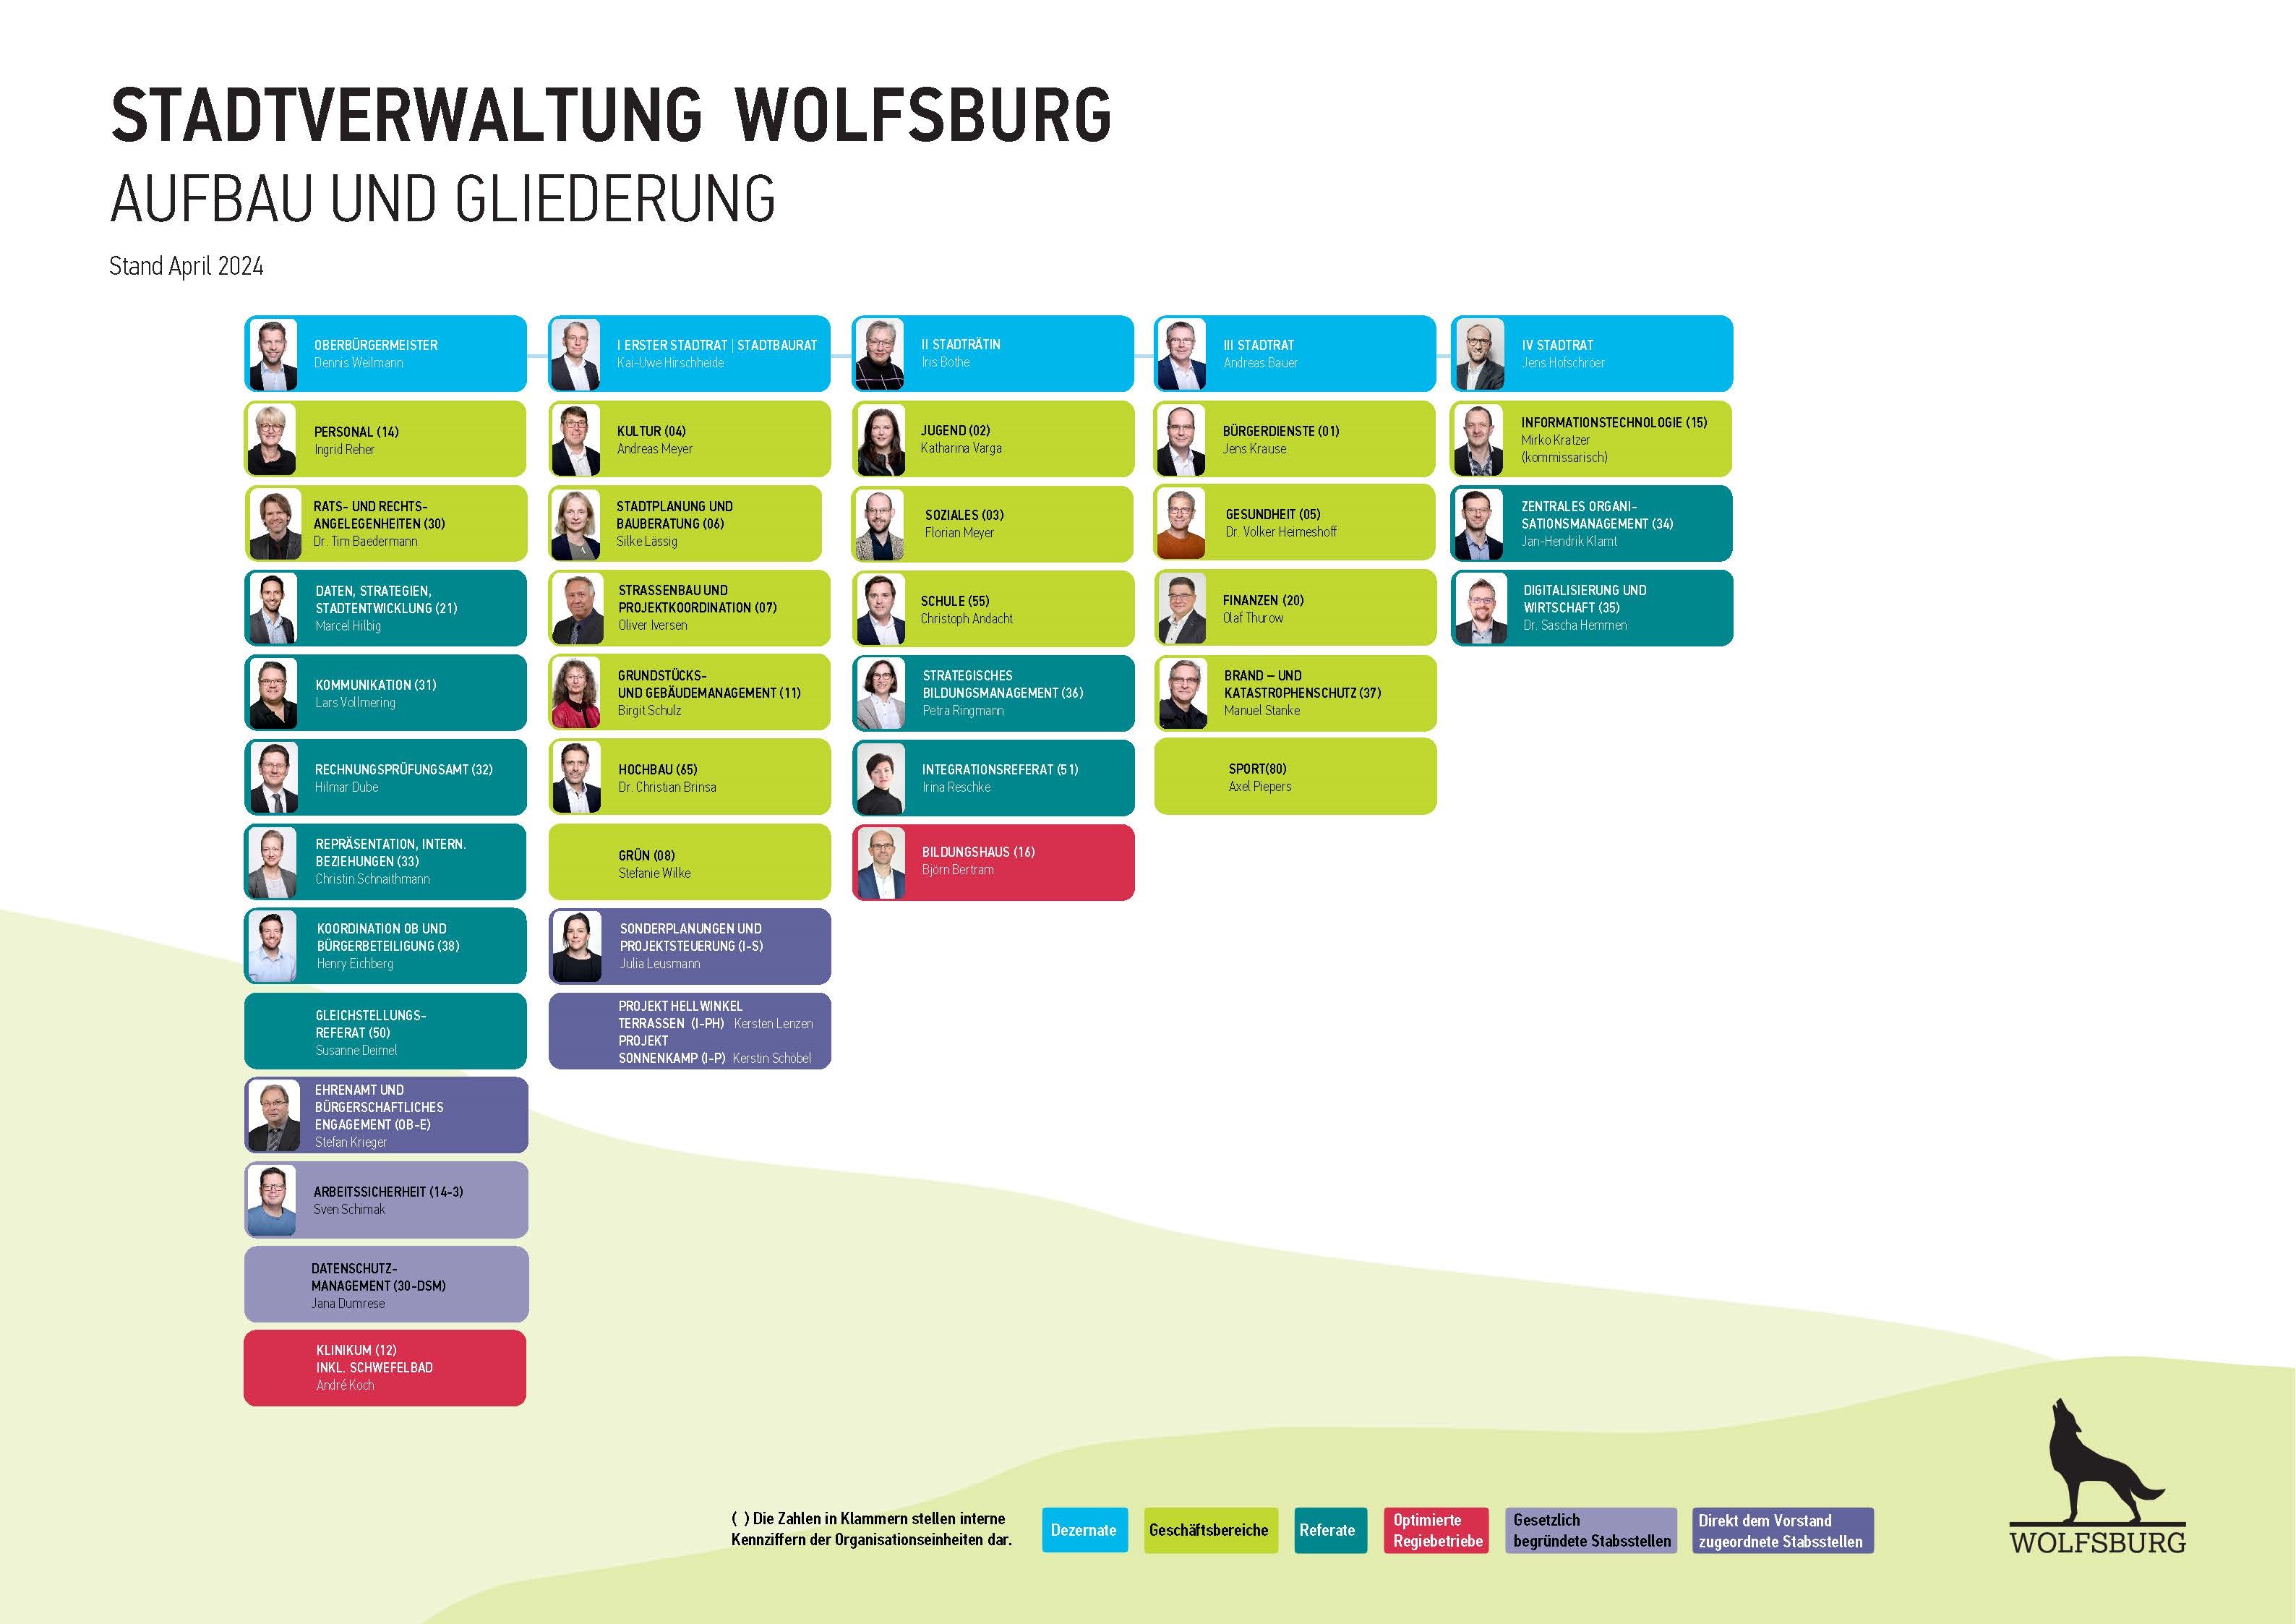 Organization chart of the Wolfsburg city administration - structure and outline